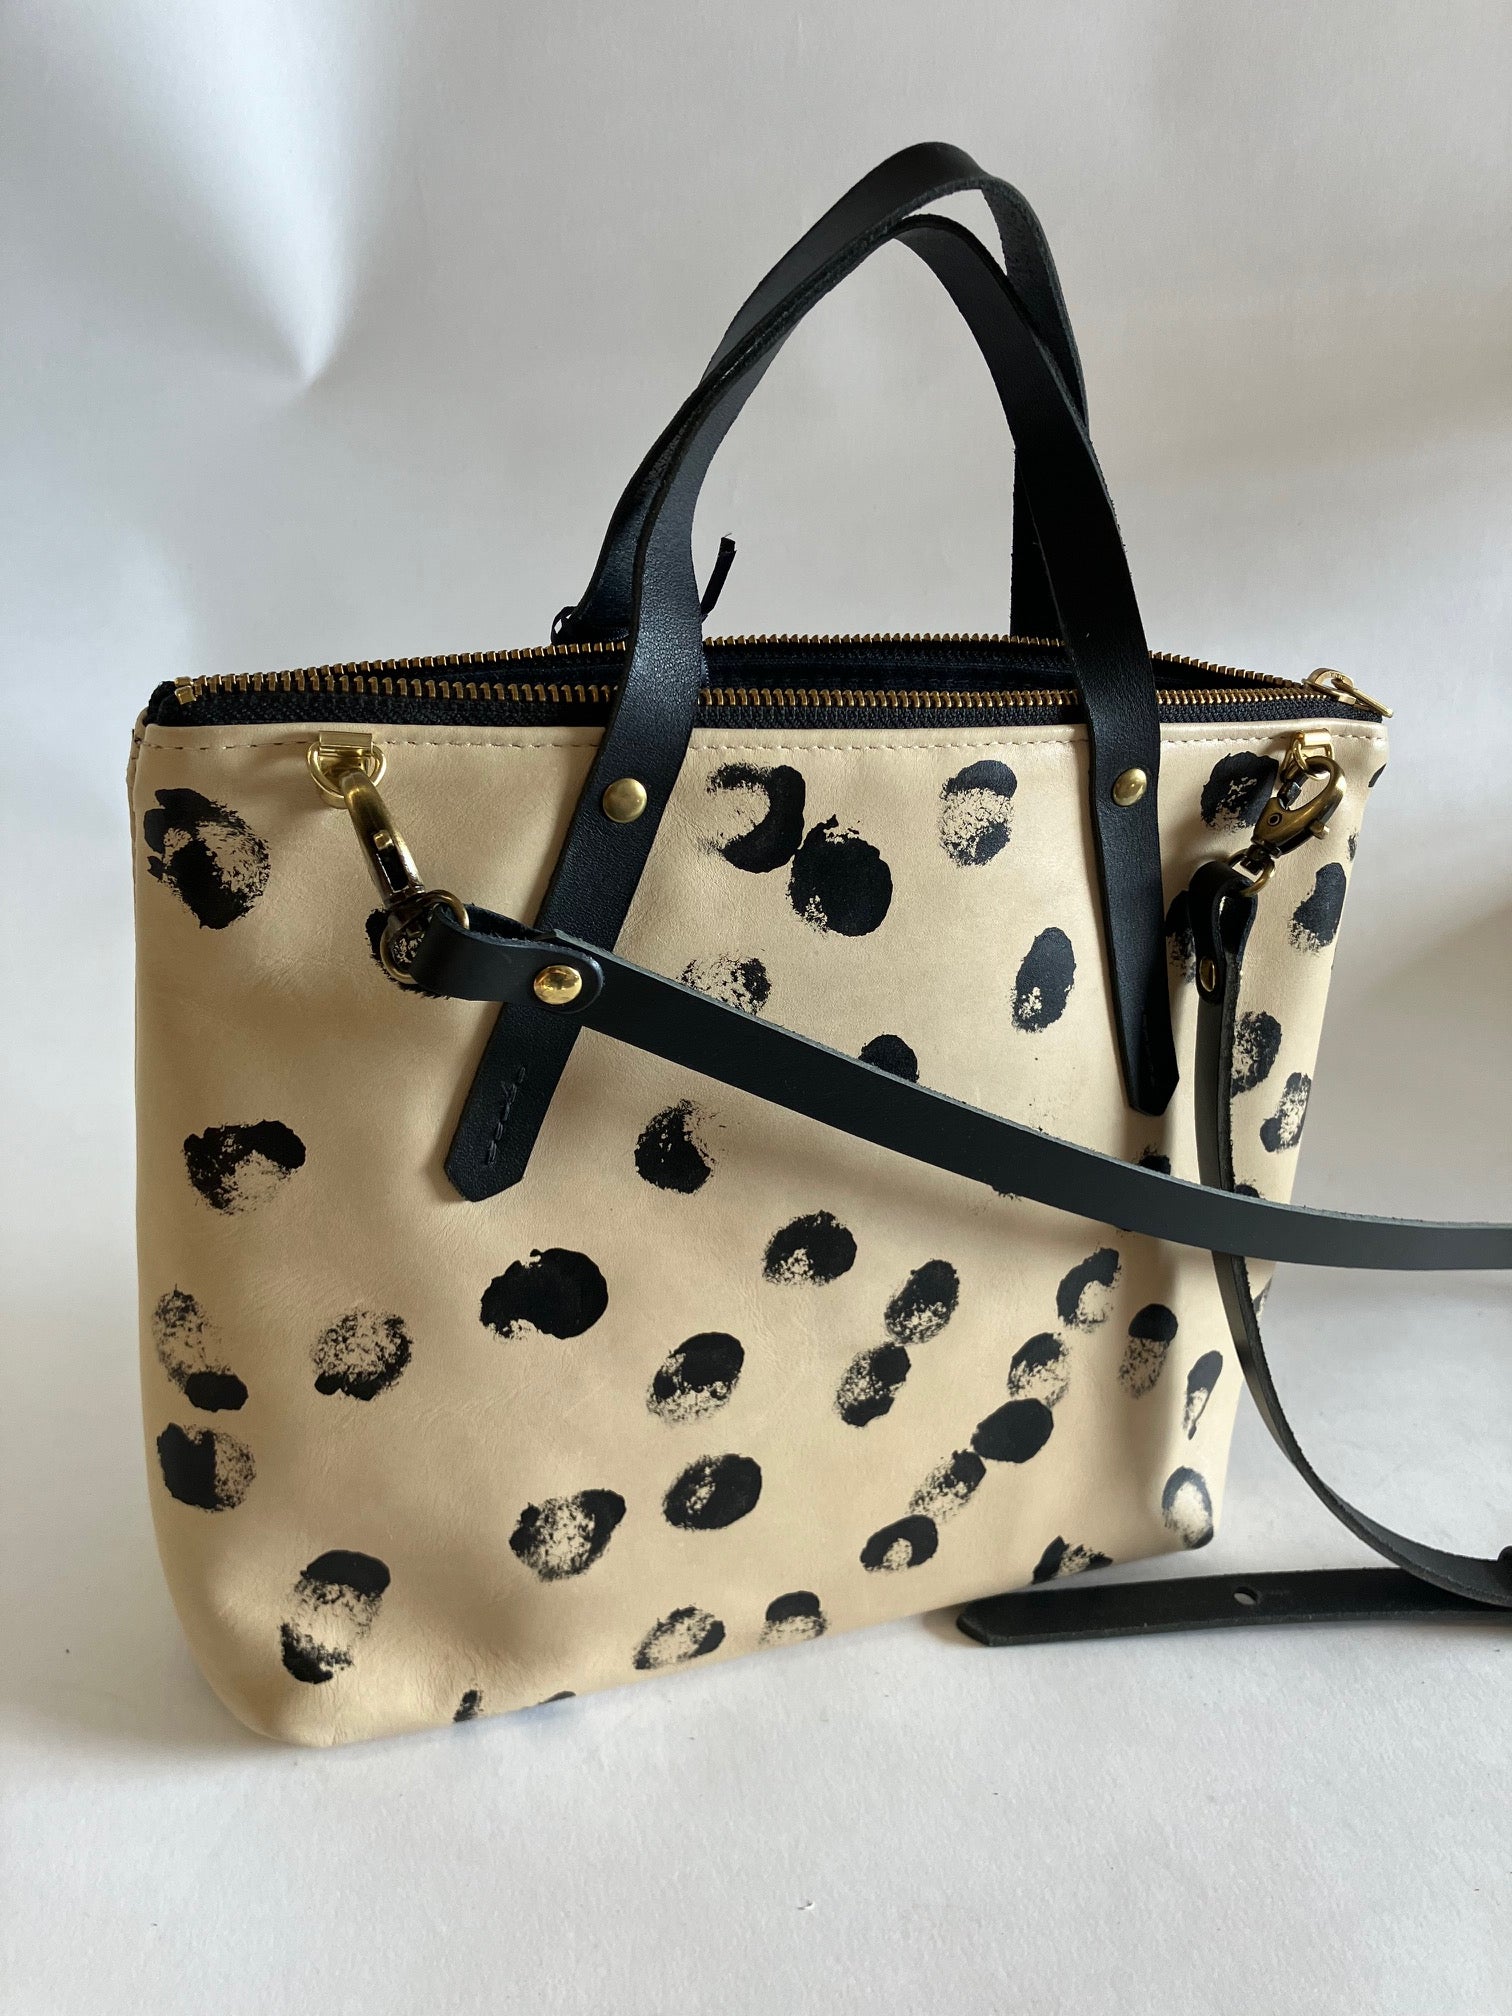 One of a kind piece handpainted Leather handbag with crossbody strap